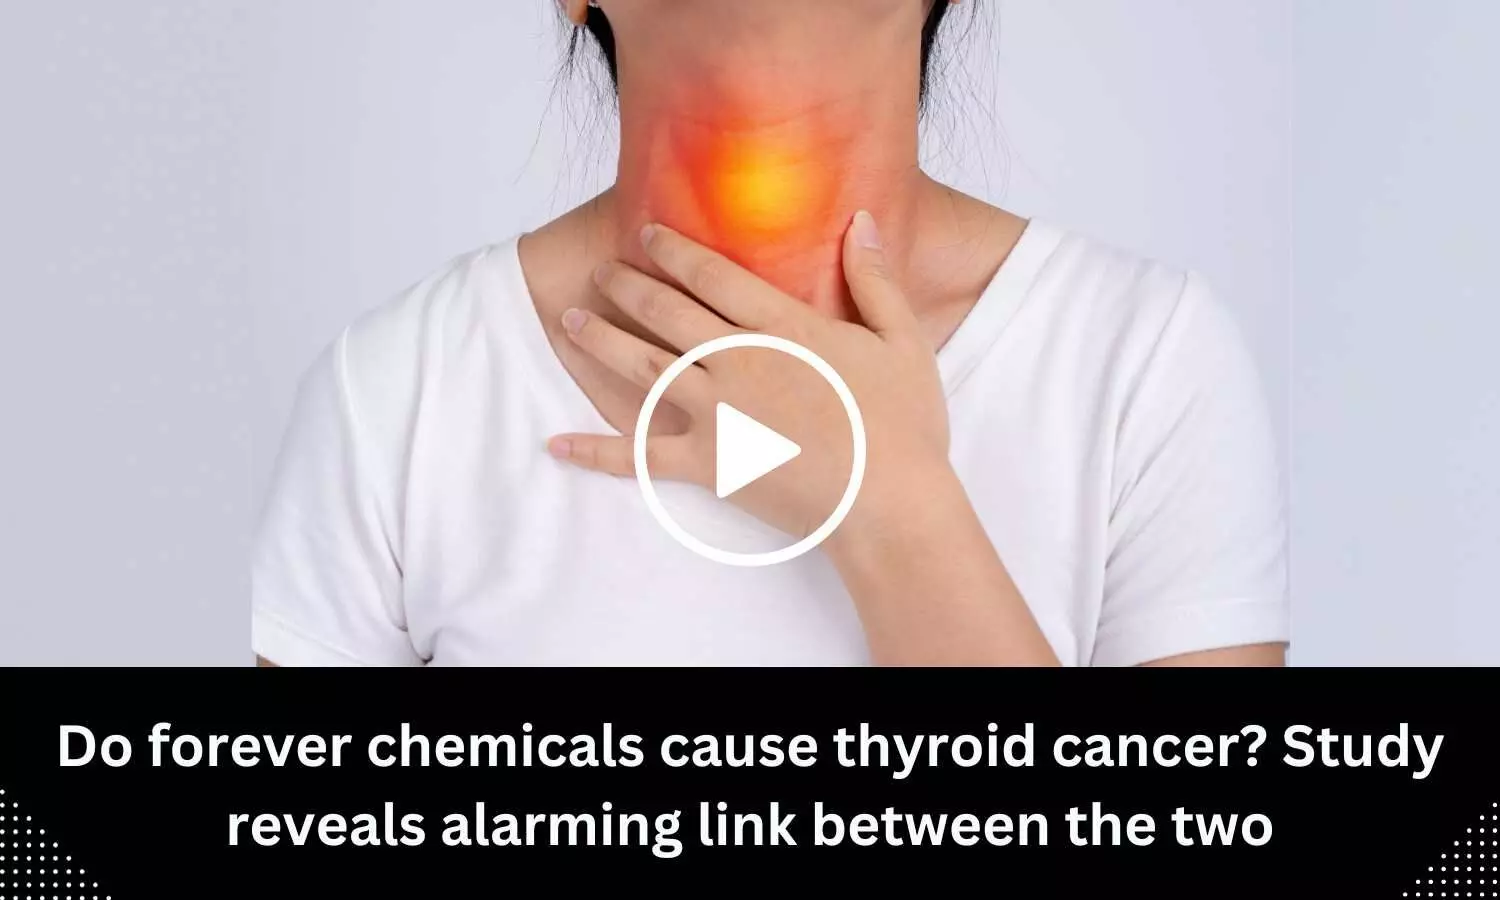 Do forever chemicals cause thyroid cancer? Study reveals alarming link between the two